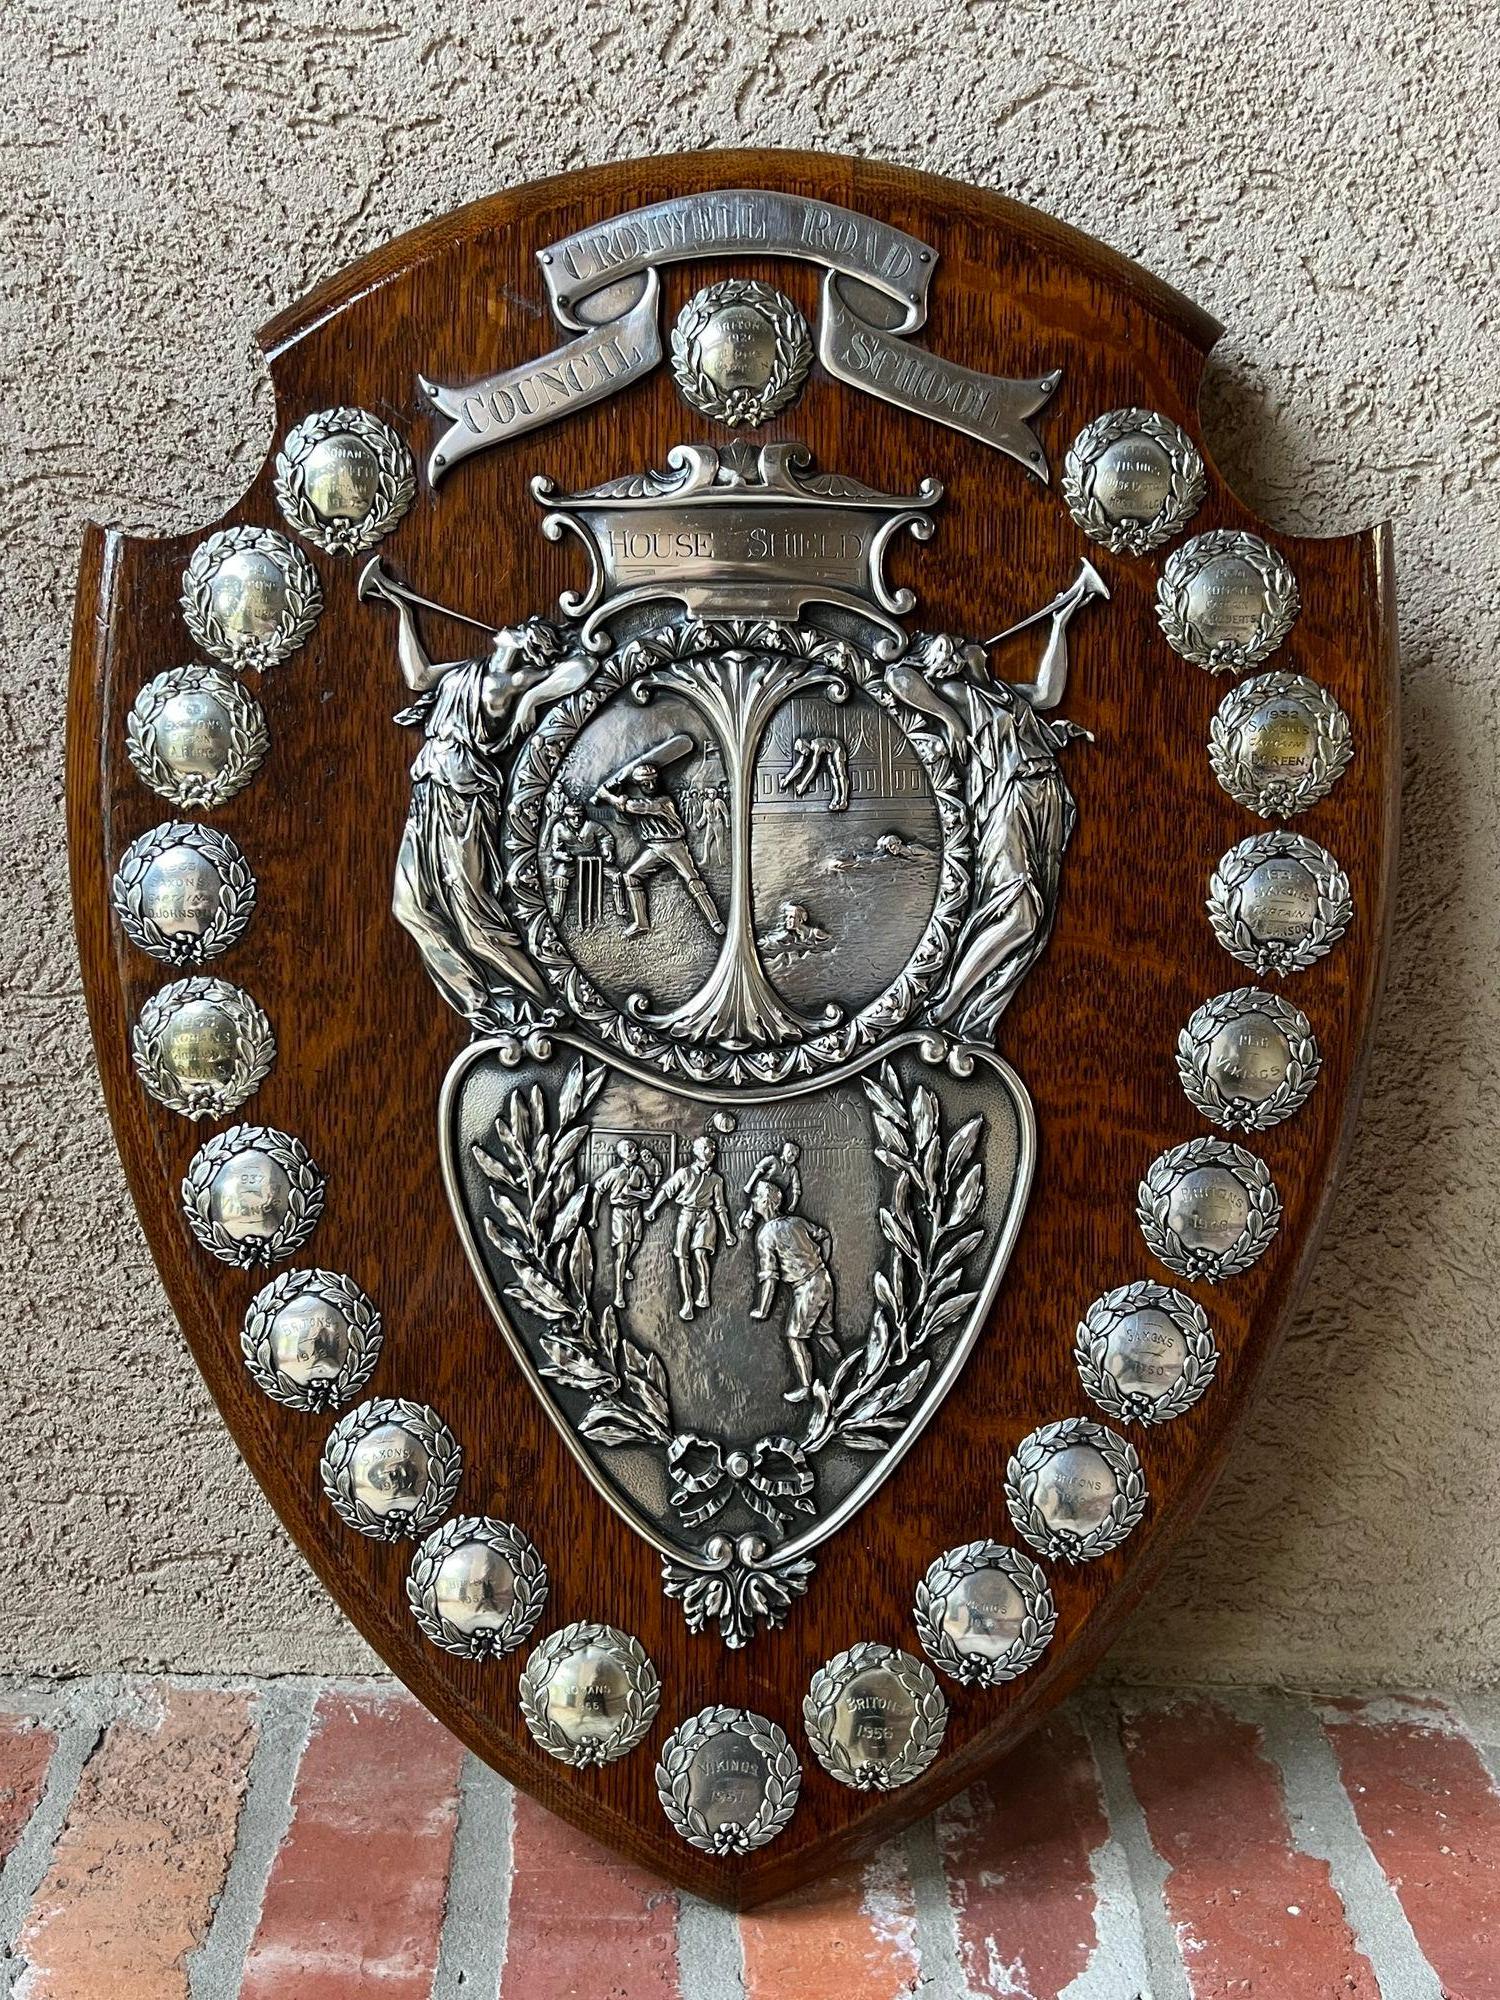 Antique English Trophy Baseball Soccer Swimming Award Plaque Silver Plate c1926.
Direct from England, just arrived in our most recent container, we have several of these one-of-a-kind English trophies that are brimming with provenance, and oh “the